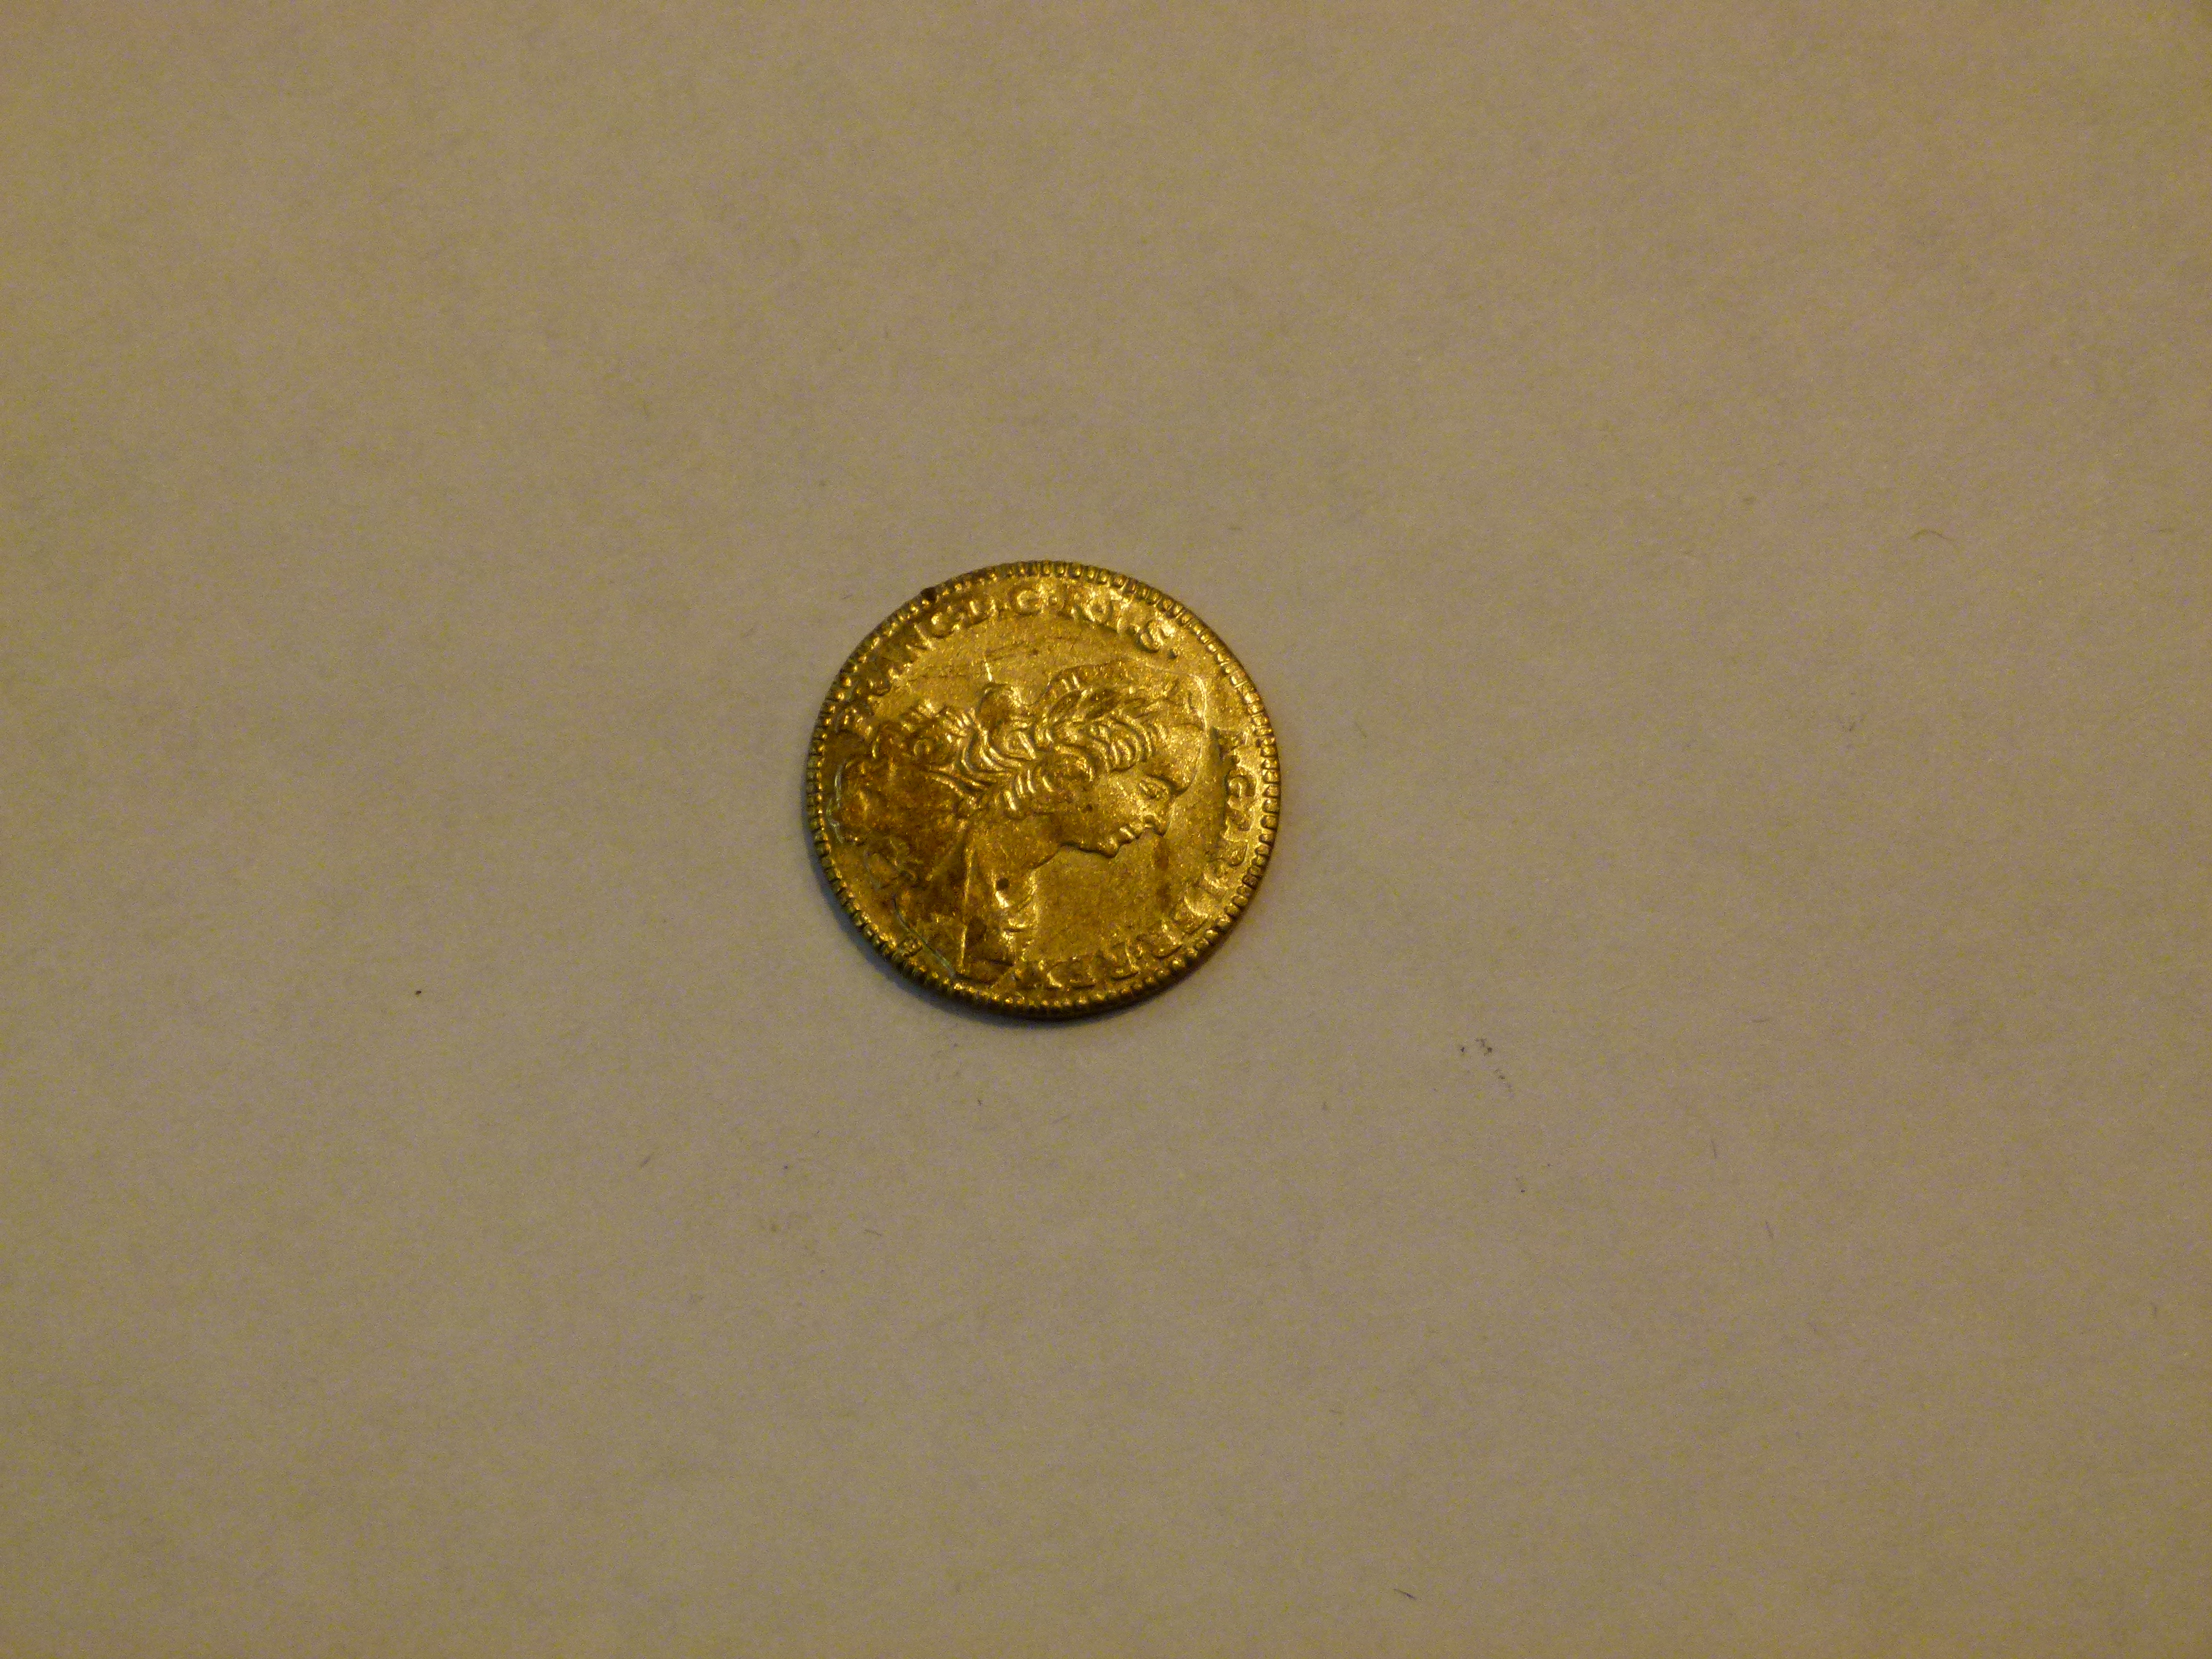 Anglesey penny in very good condition, r - Image 2 of 3